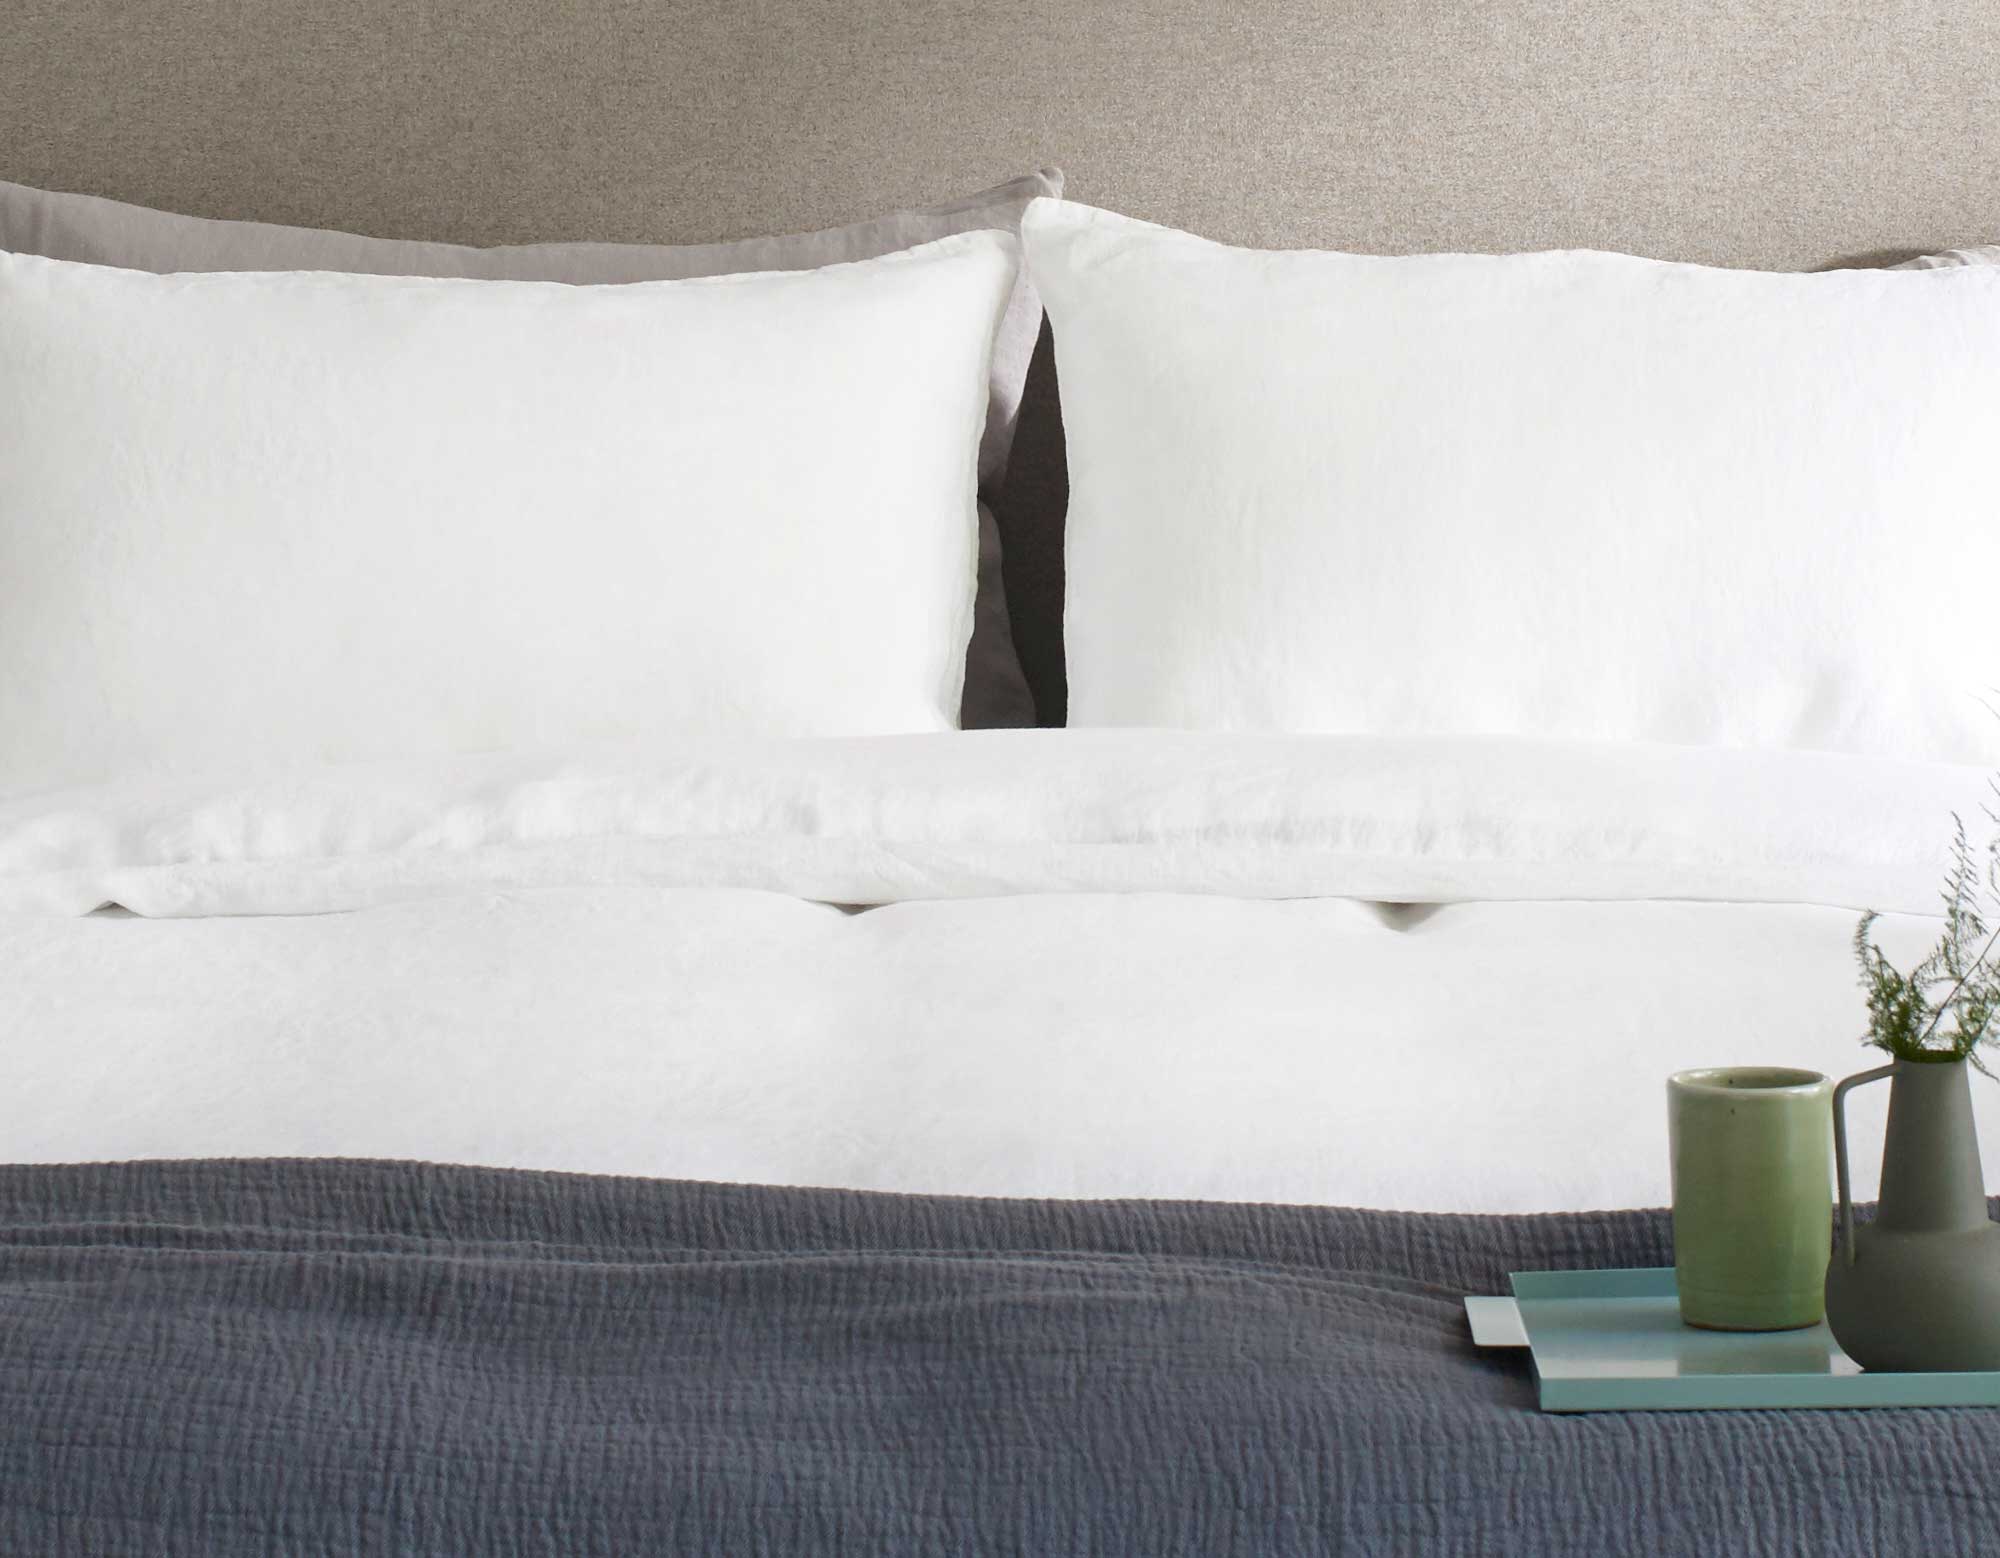 White linen duvet cover on bed with breakfast in bed 